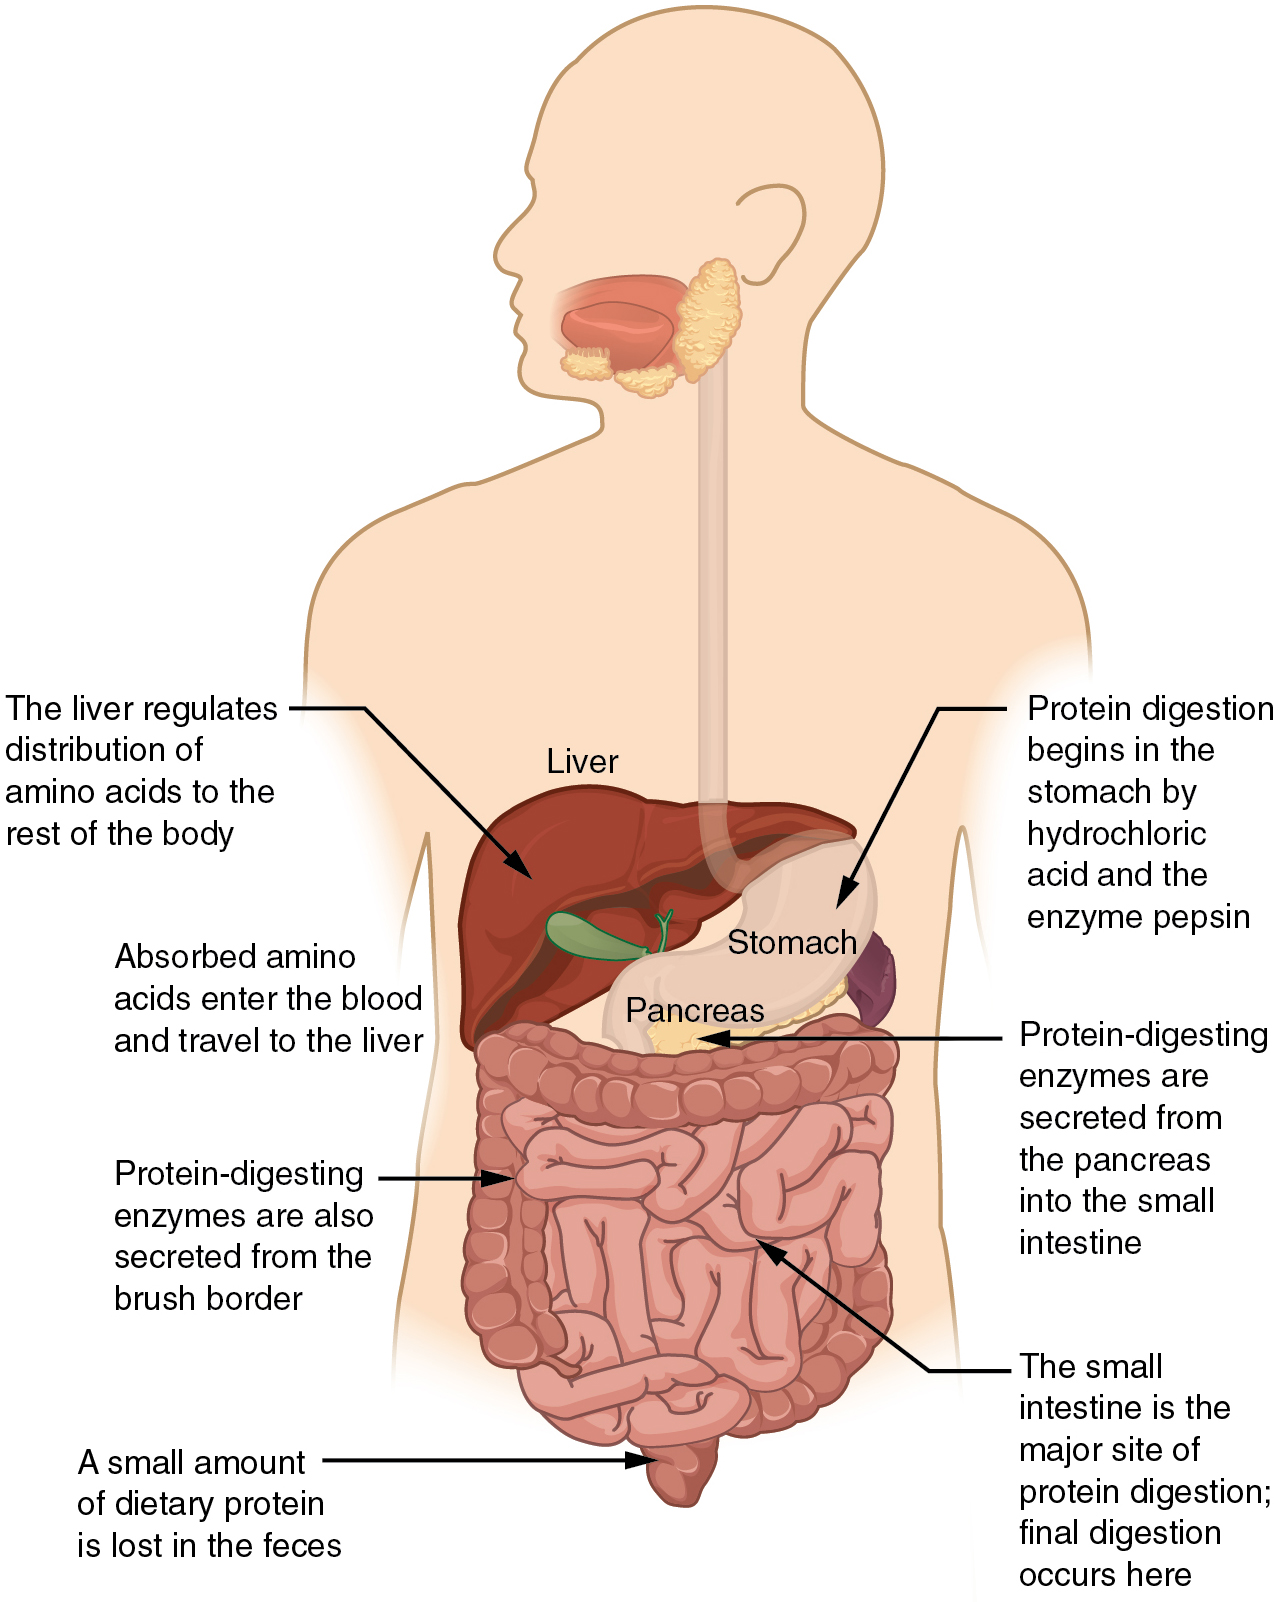 This diagrams shows the human digestive system and identifies the role of each organ in protein digestion. A text call-out next to each organ details the specific function.